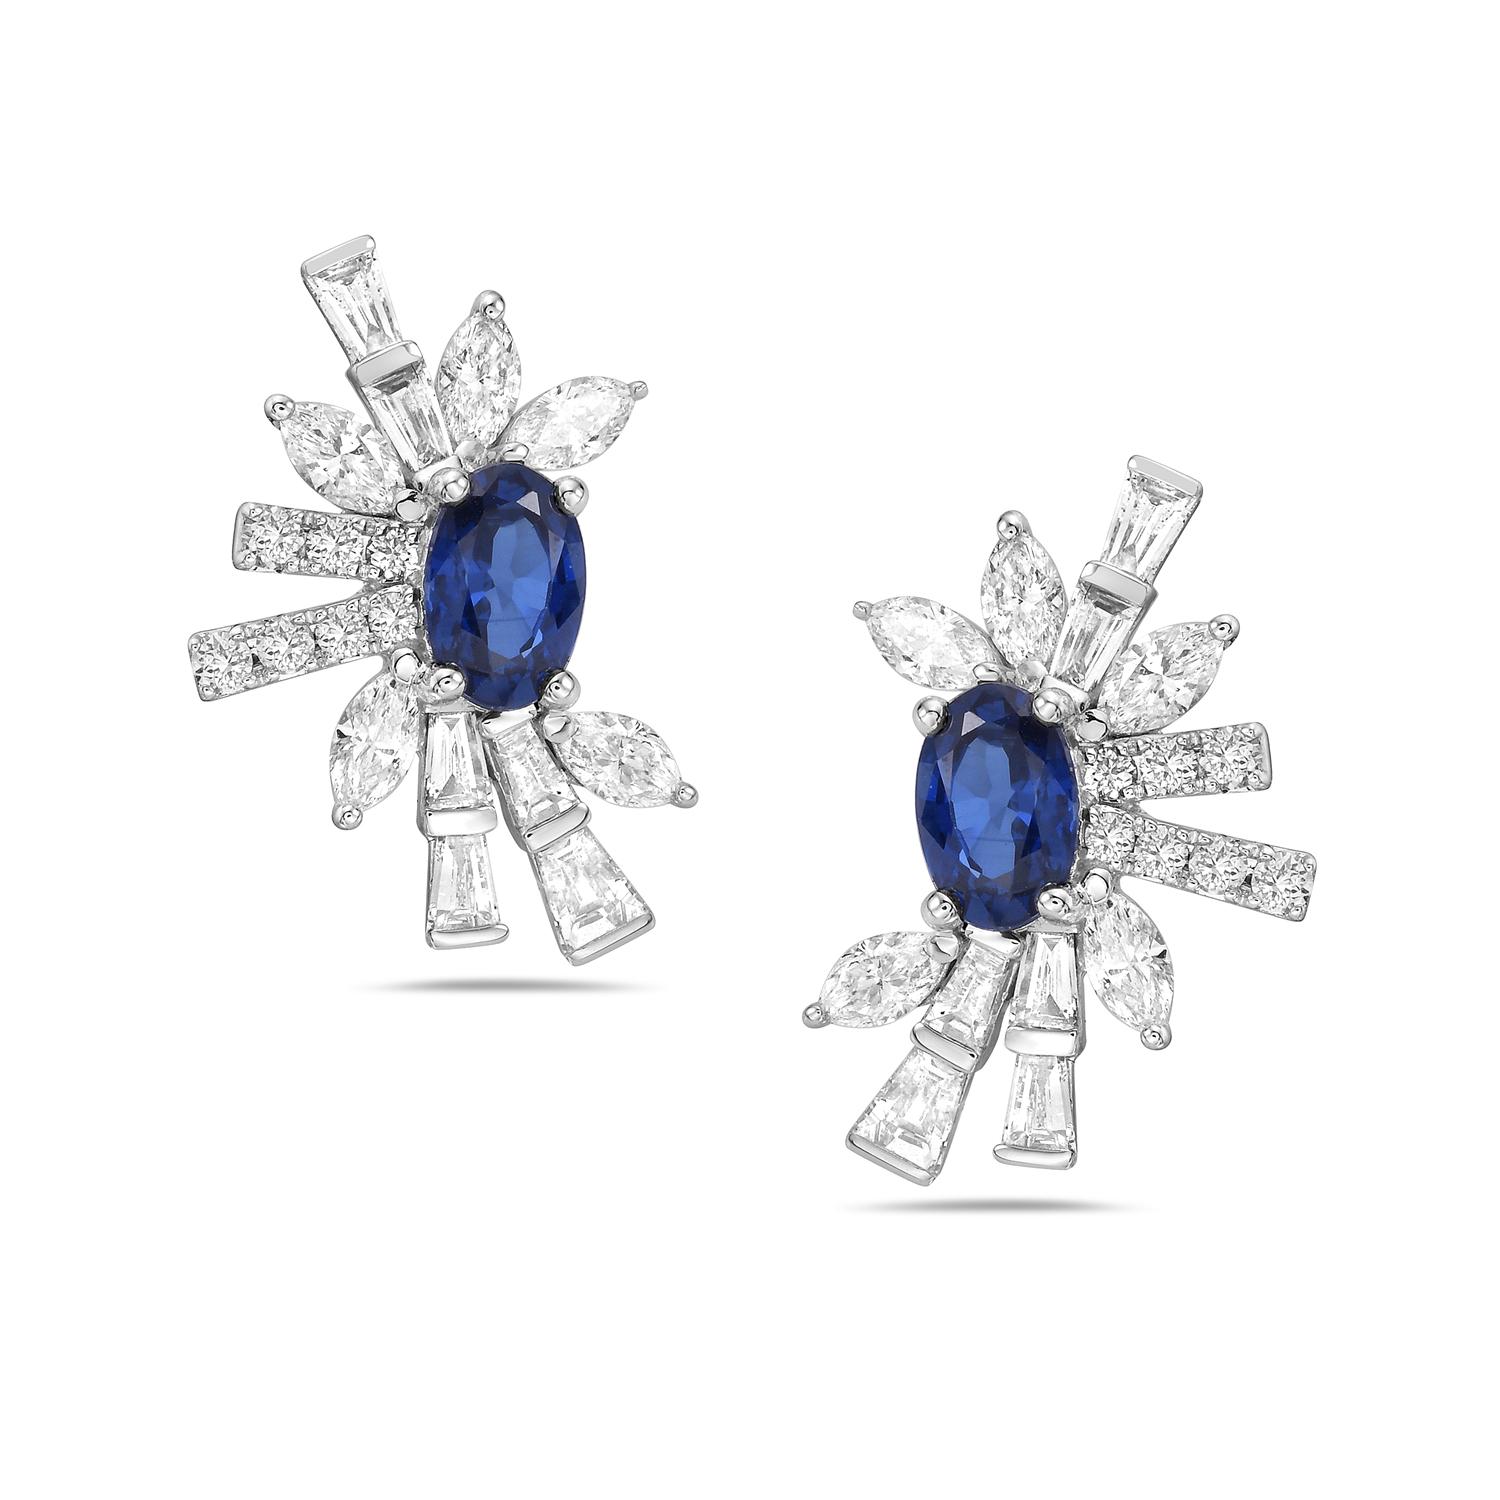 Mixed Cut Baguette & Pear Shaped 18k Stud Earrings With Blue Sapphire In Centre For Sale